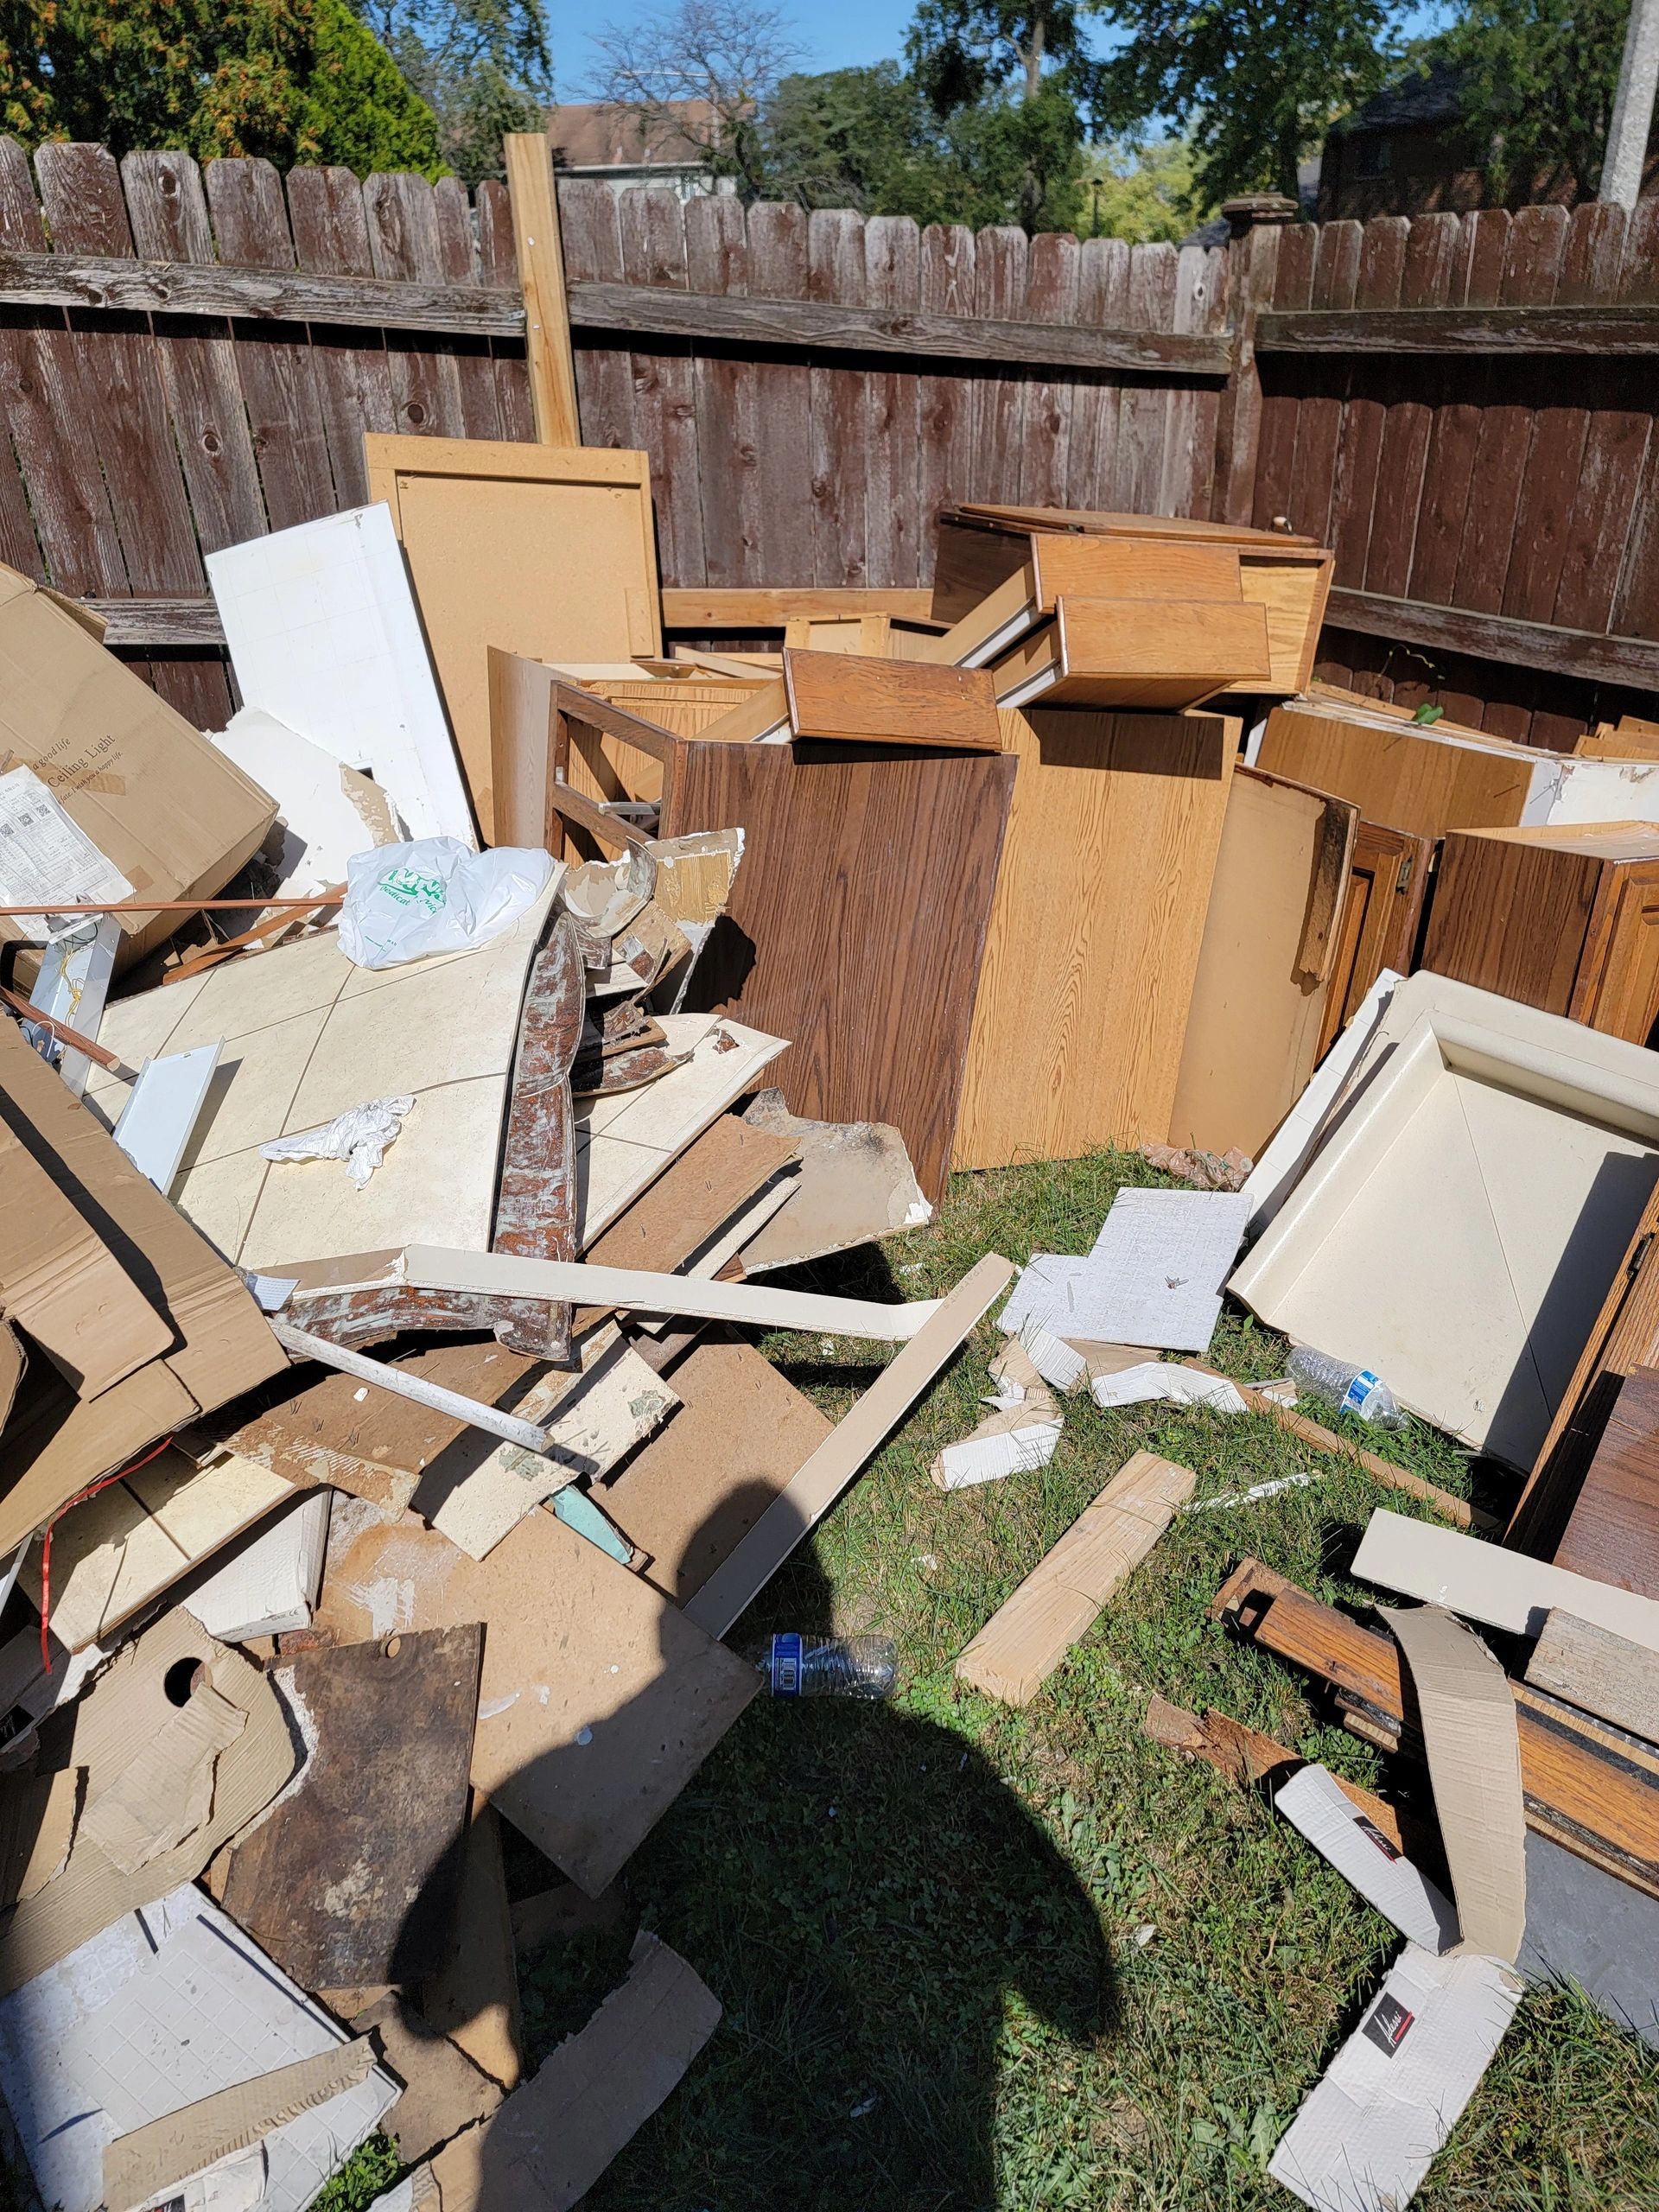 Construction debris removal. Junk removal. Chicago suburbs junk removal